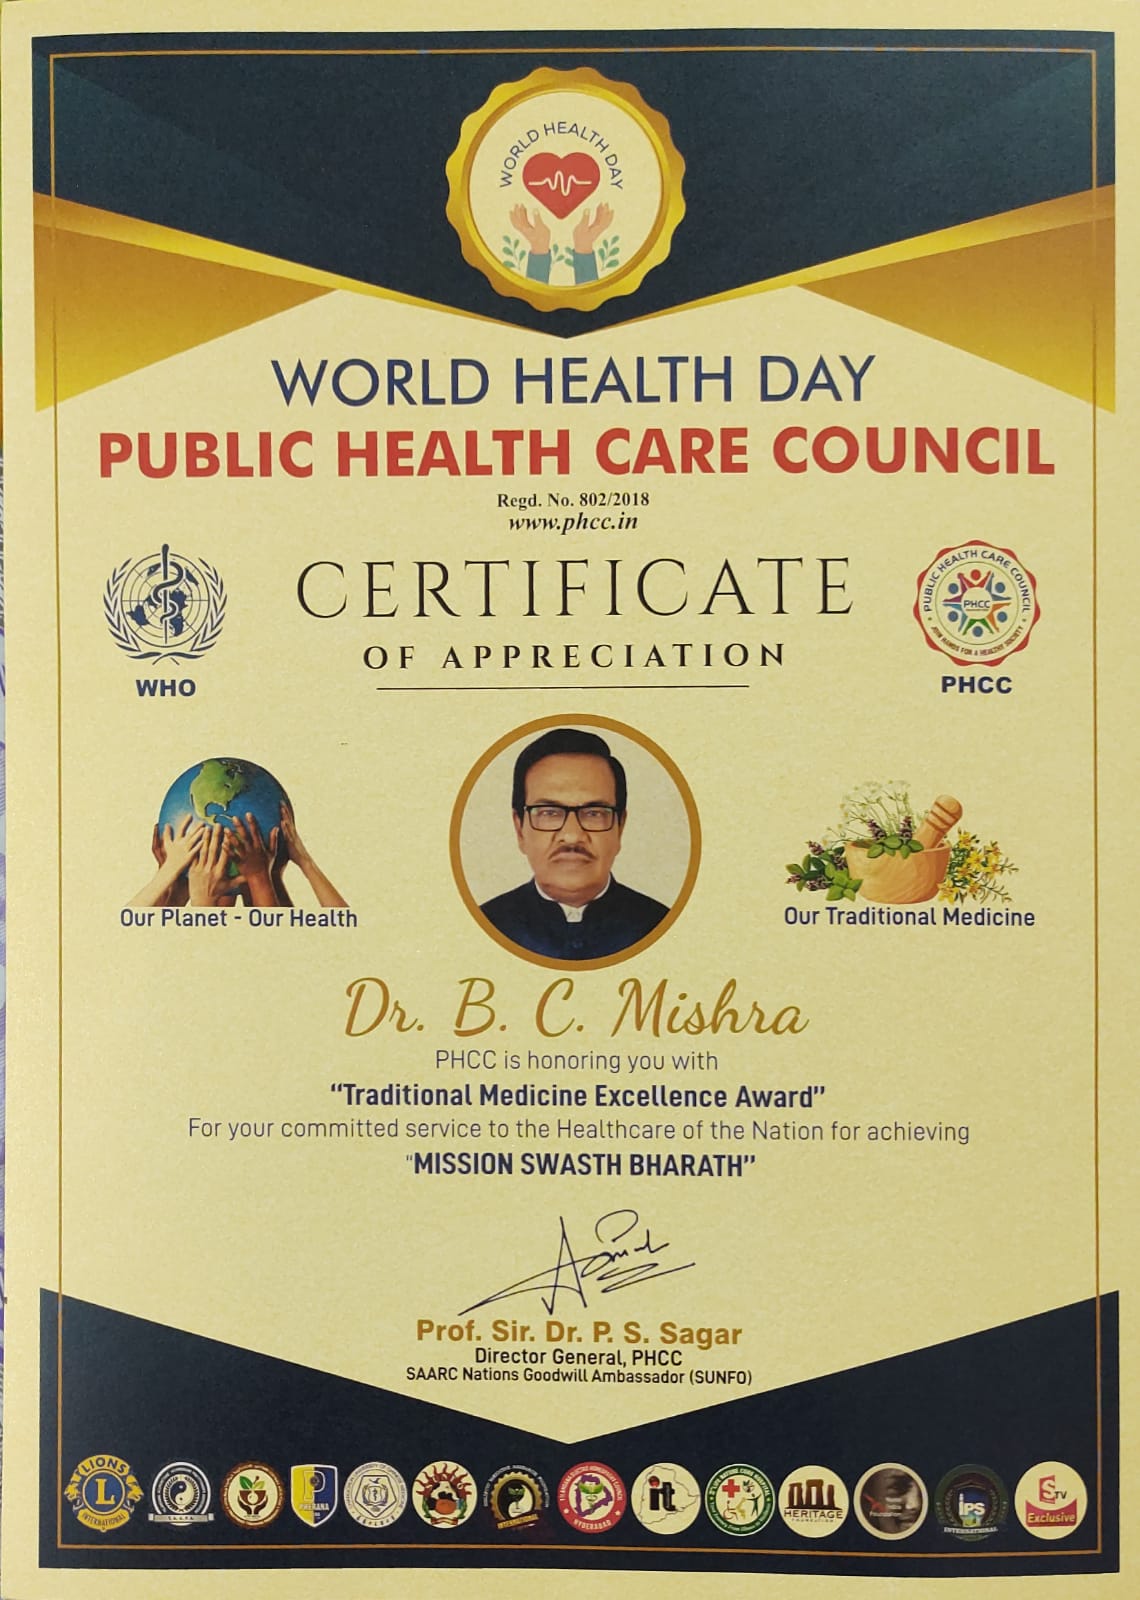 traditional medicine excellence award given to B.C. Mishra - Hyderabad